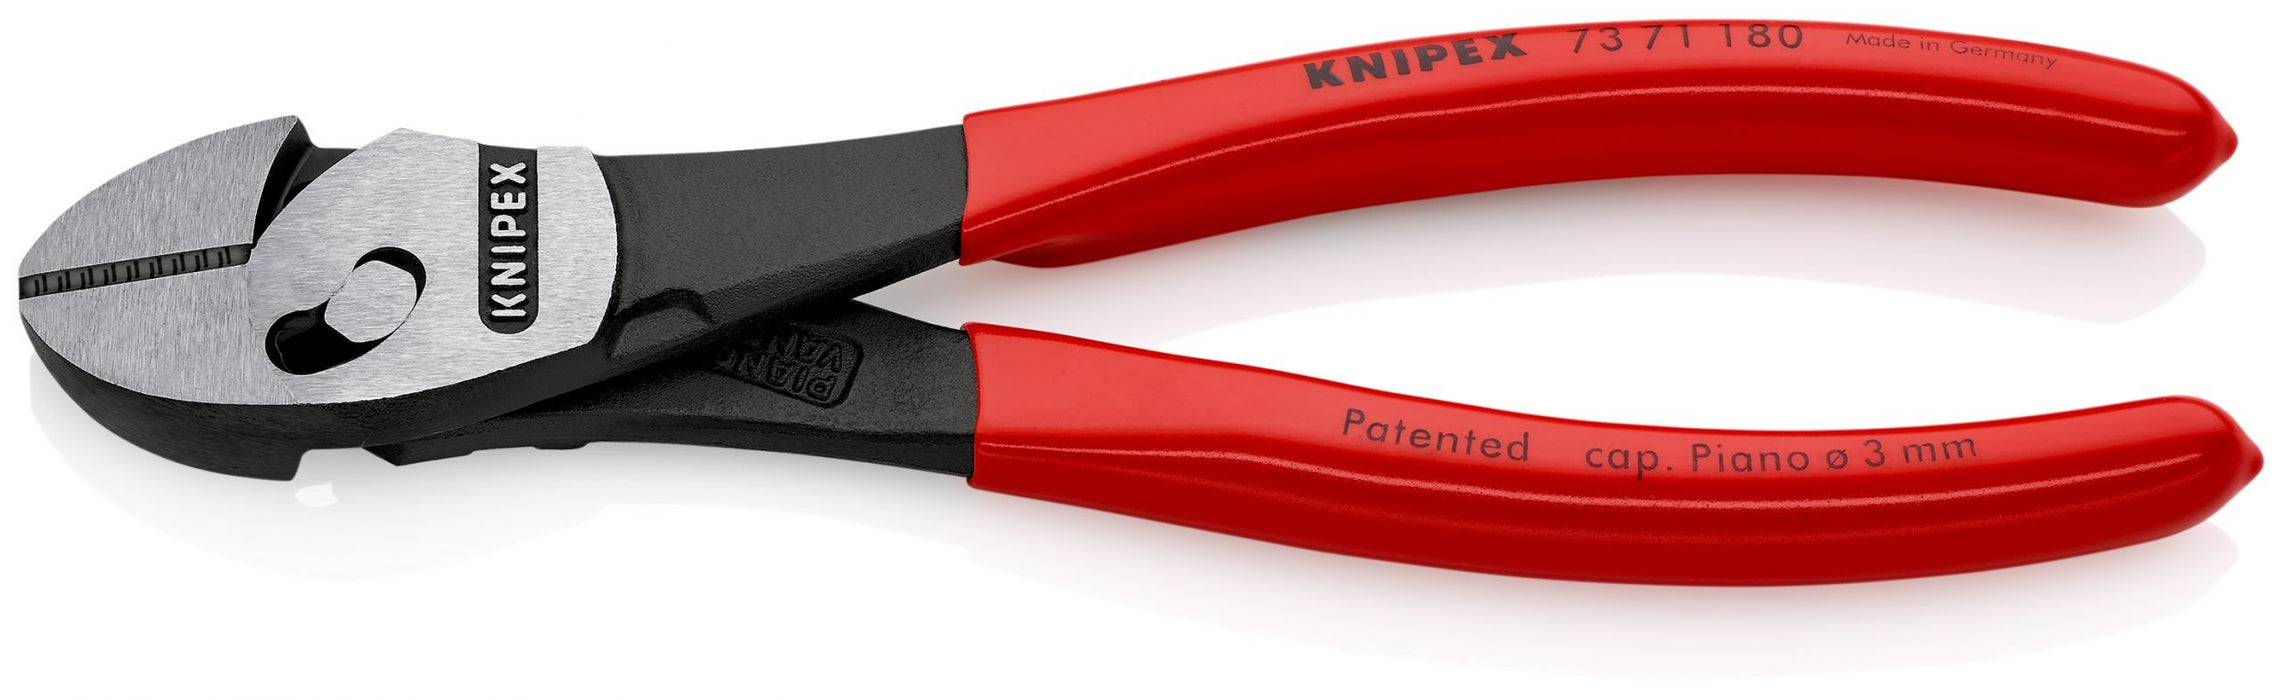 Knipex 73 71 180 High Leverage TwinForce Diagonal Side Cutter Pliers 180mm